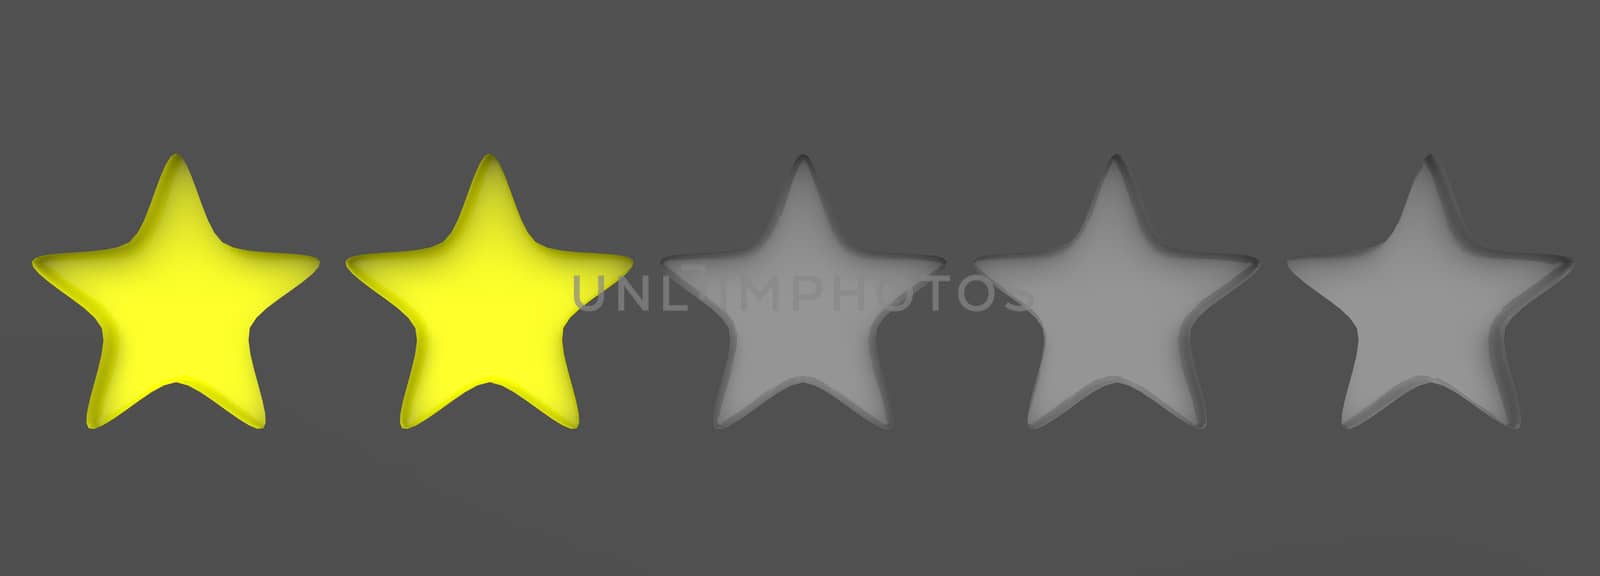 3d two yellow star on color background. Render and illustration of golden star for premium review by Andreajk3